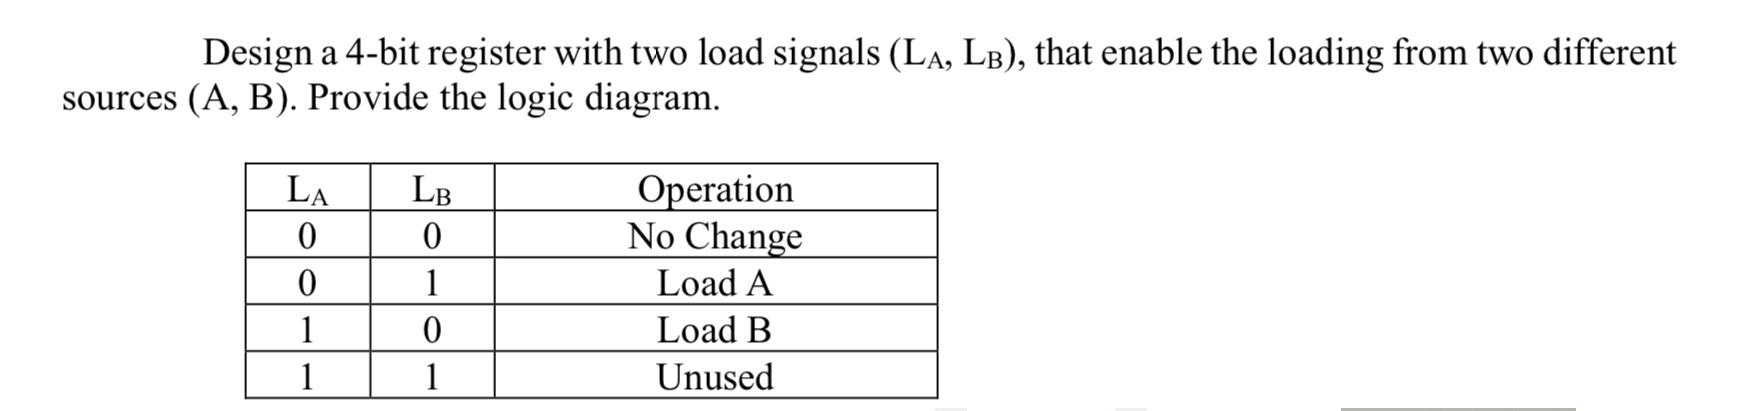 Design a 4-bit register with two load signals (L, L), that enable the loading from two different sources (A,